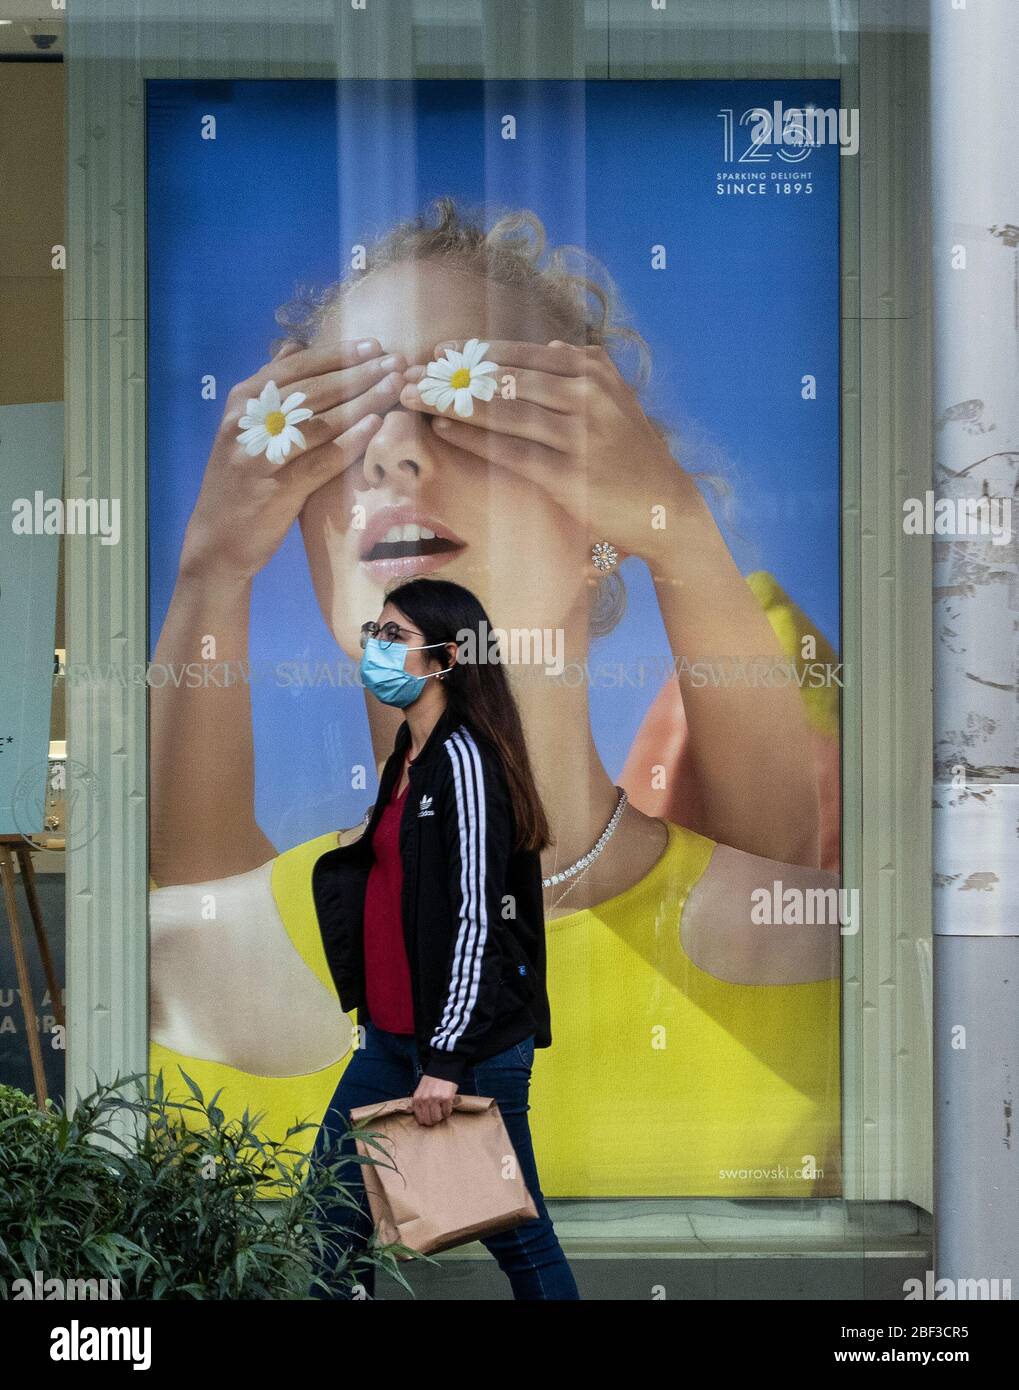 Covid pandemic crisis in Melbourne Australia  2020. Scenes of masked people shopping in and around Melbourne during lockdown. Stock Photo